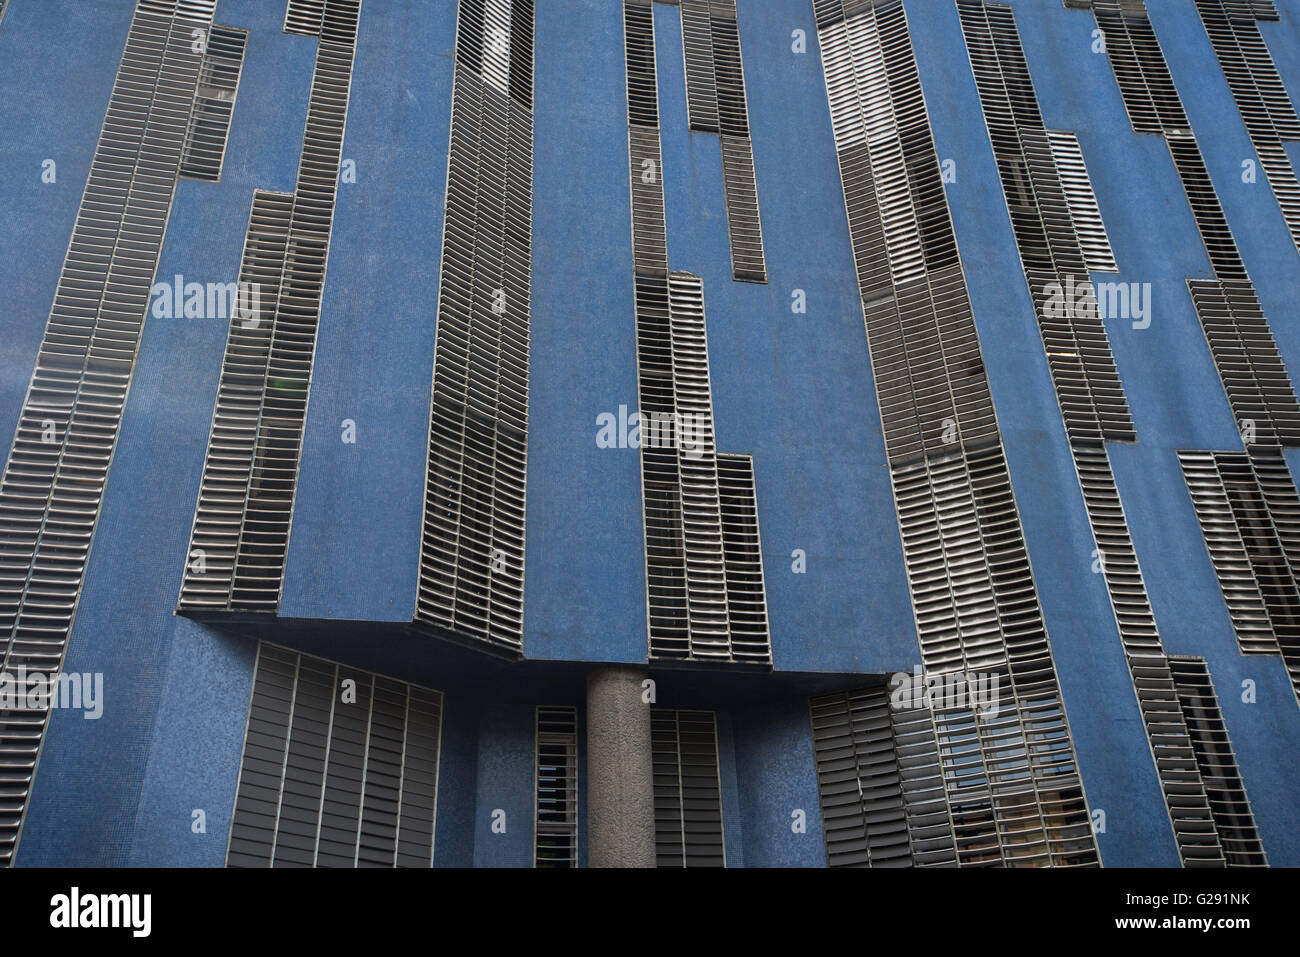 Interesting building architecture comprised of blue panels and metallic grid work Stock Photo